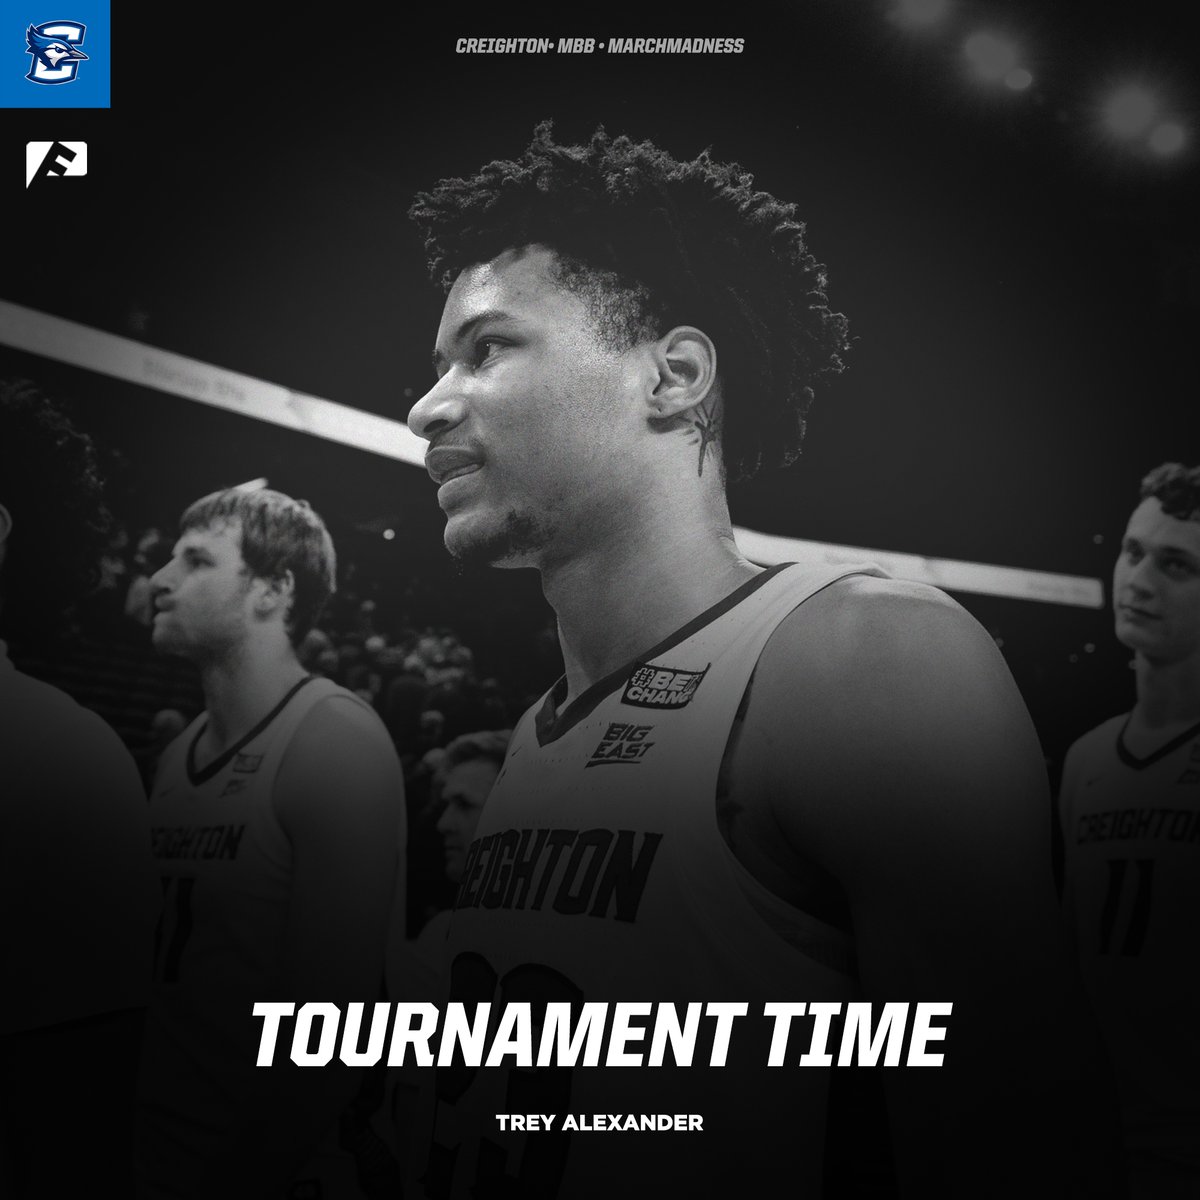 Good luck to @TrickyTrey23 and @bluejaymbb at #marchmadness tonight!⁠ ⁠ 📝 Revisit his story 'Tournament Time' to get ready for the big game tonight.⁠ stories.gocreighton.com/trey-alexander… ⁠ #fanword #collegesports #studentathlete #basketballstories #creighton #gojays #creightonmbb